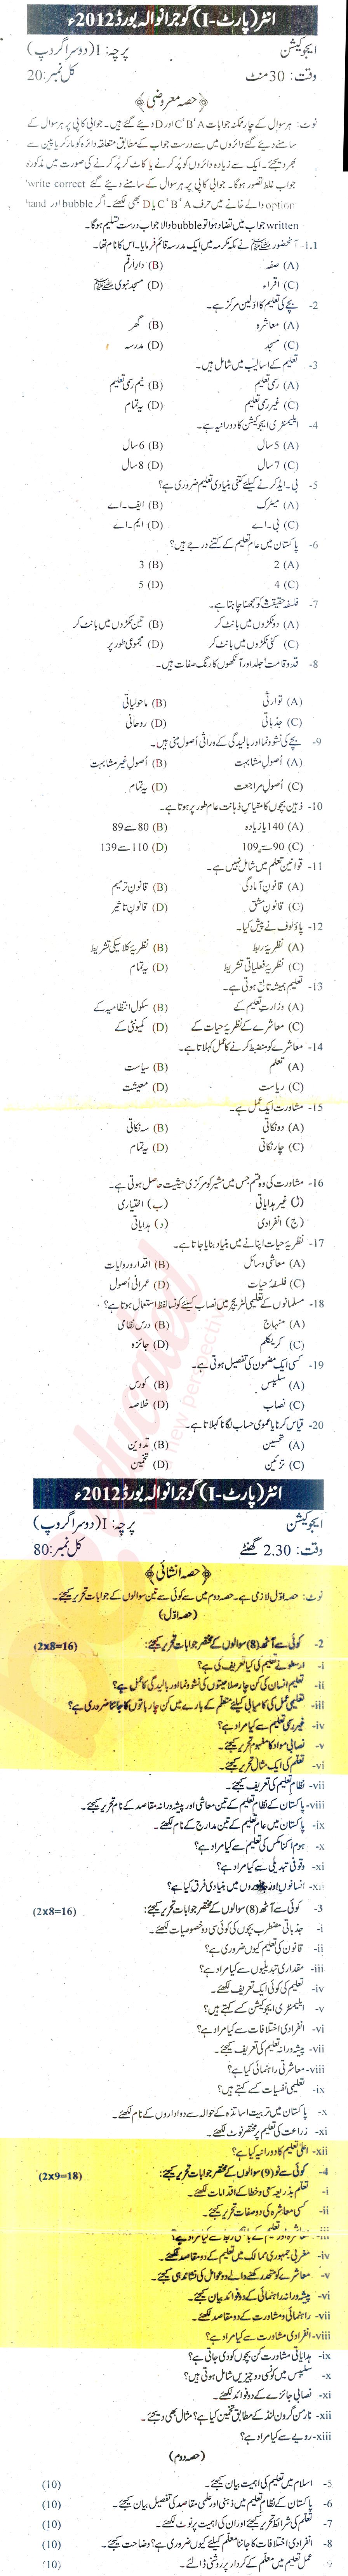 Education FA Part 1 Past Paper Group 2 BISE Gujranwala 2012